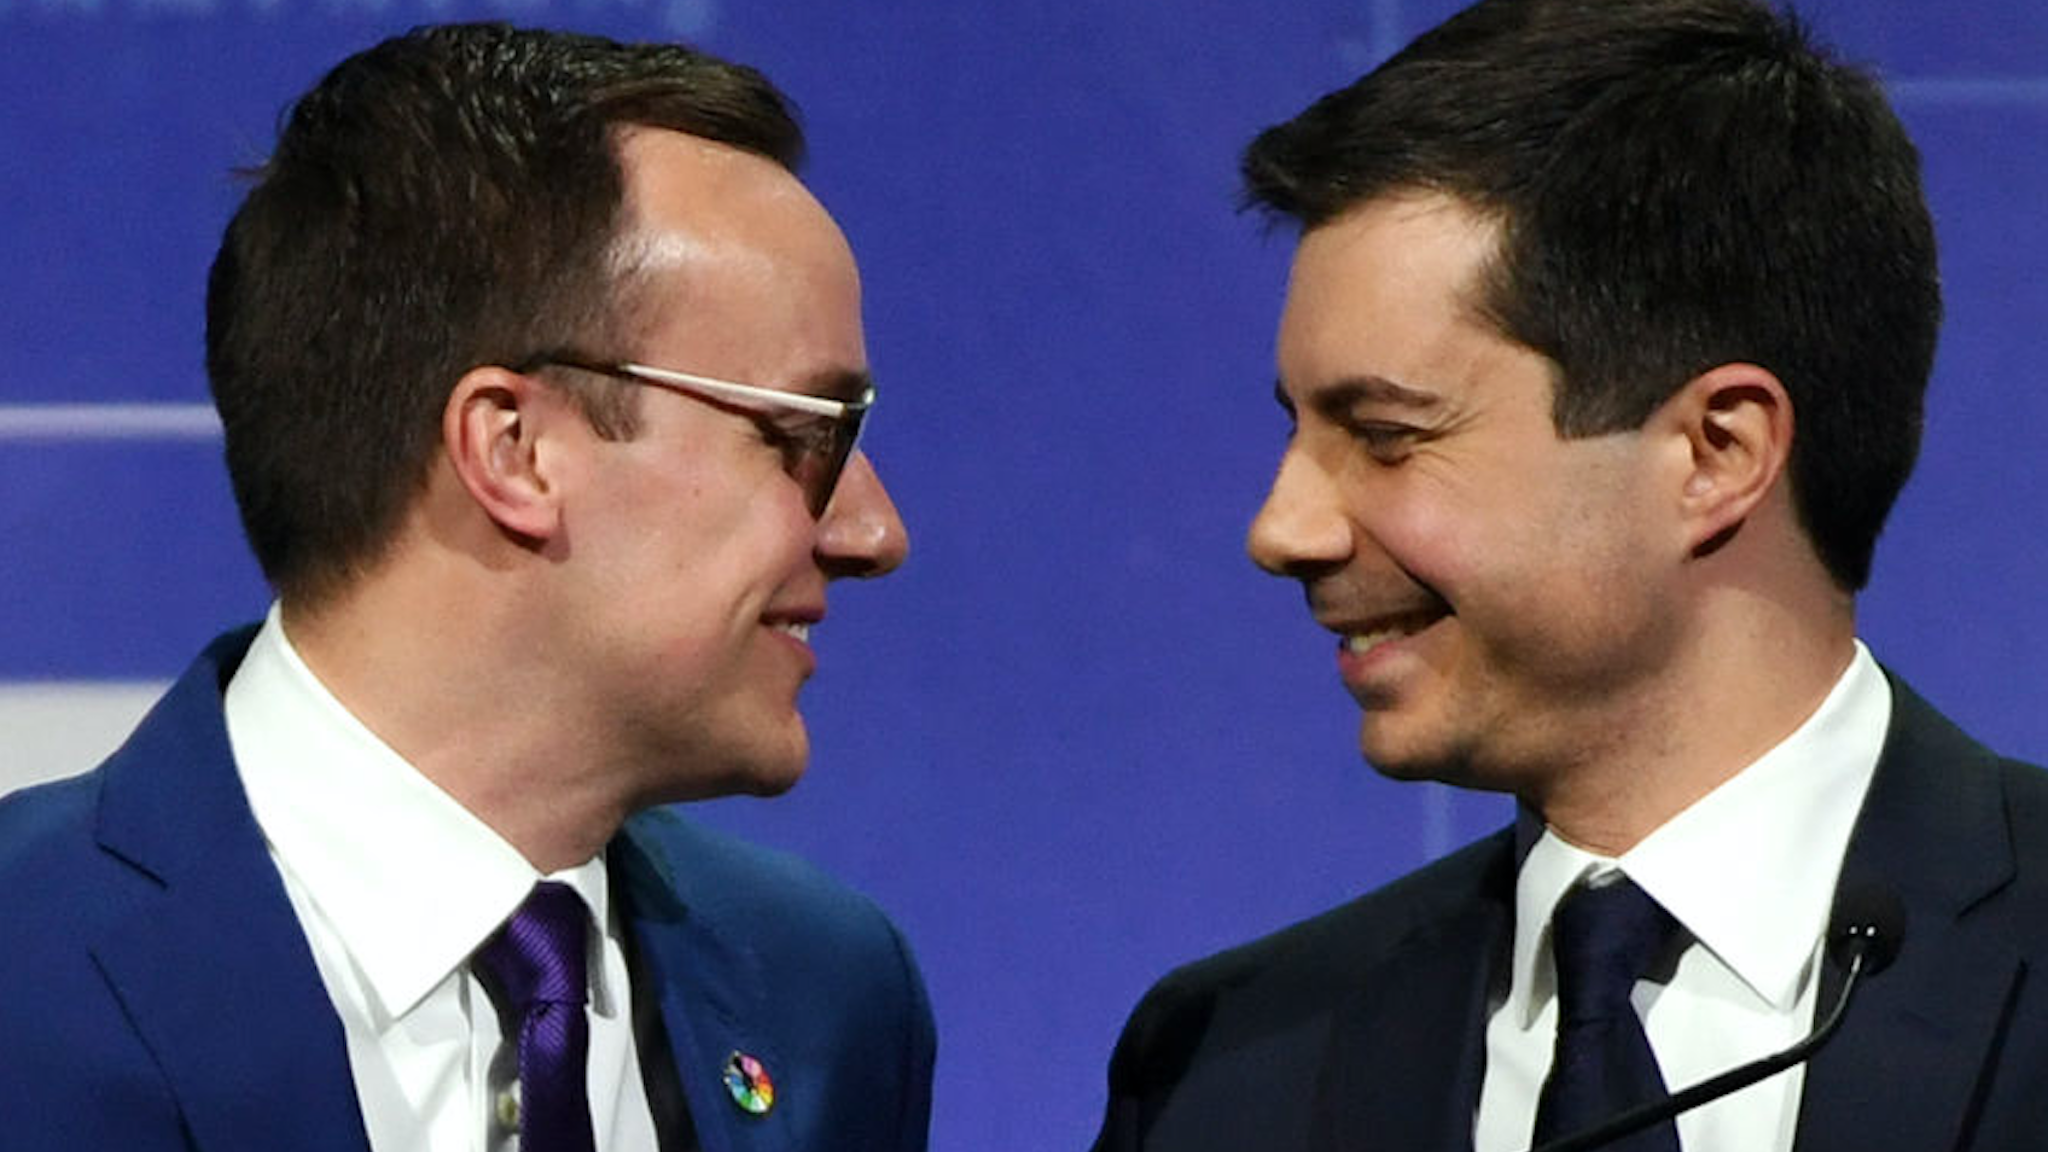 Chasten Glezman Buttigieg (L) greets his husband, South Bend, Indiana Mayor Pete Buttigieg, after he delivered a keynote address at the Human Rights Campaign's (HRC) 14th annual Las Vegas Gala at Caesars Palace on May 11, 2019 in Las Vegas, Nevada.